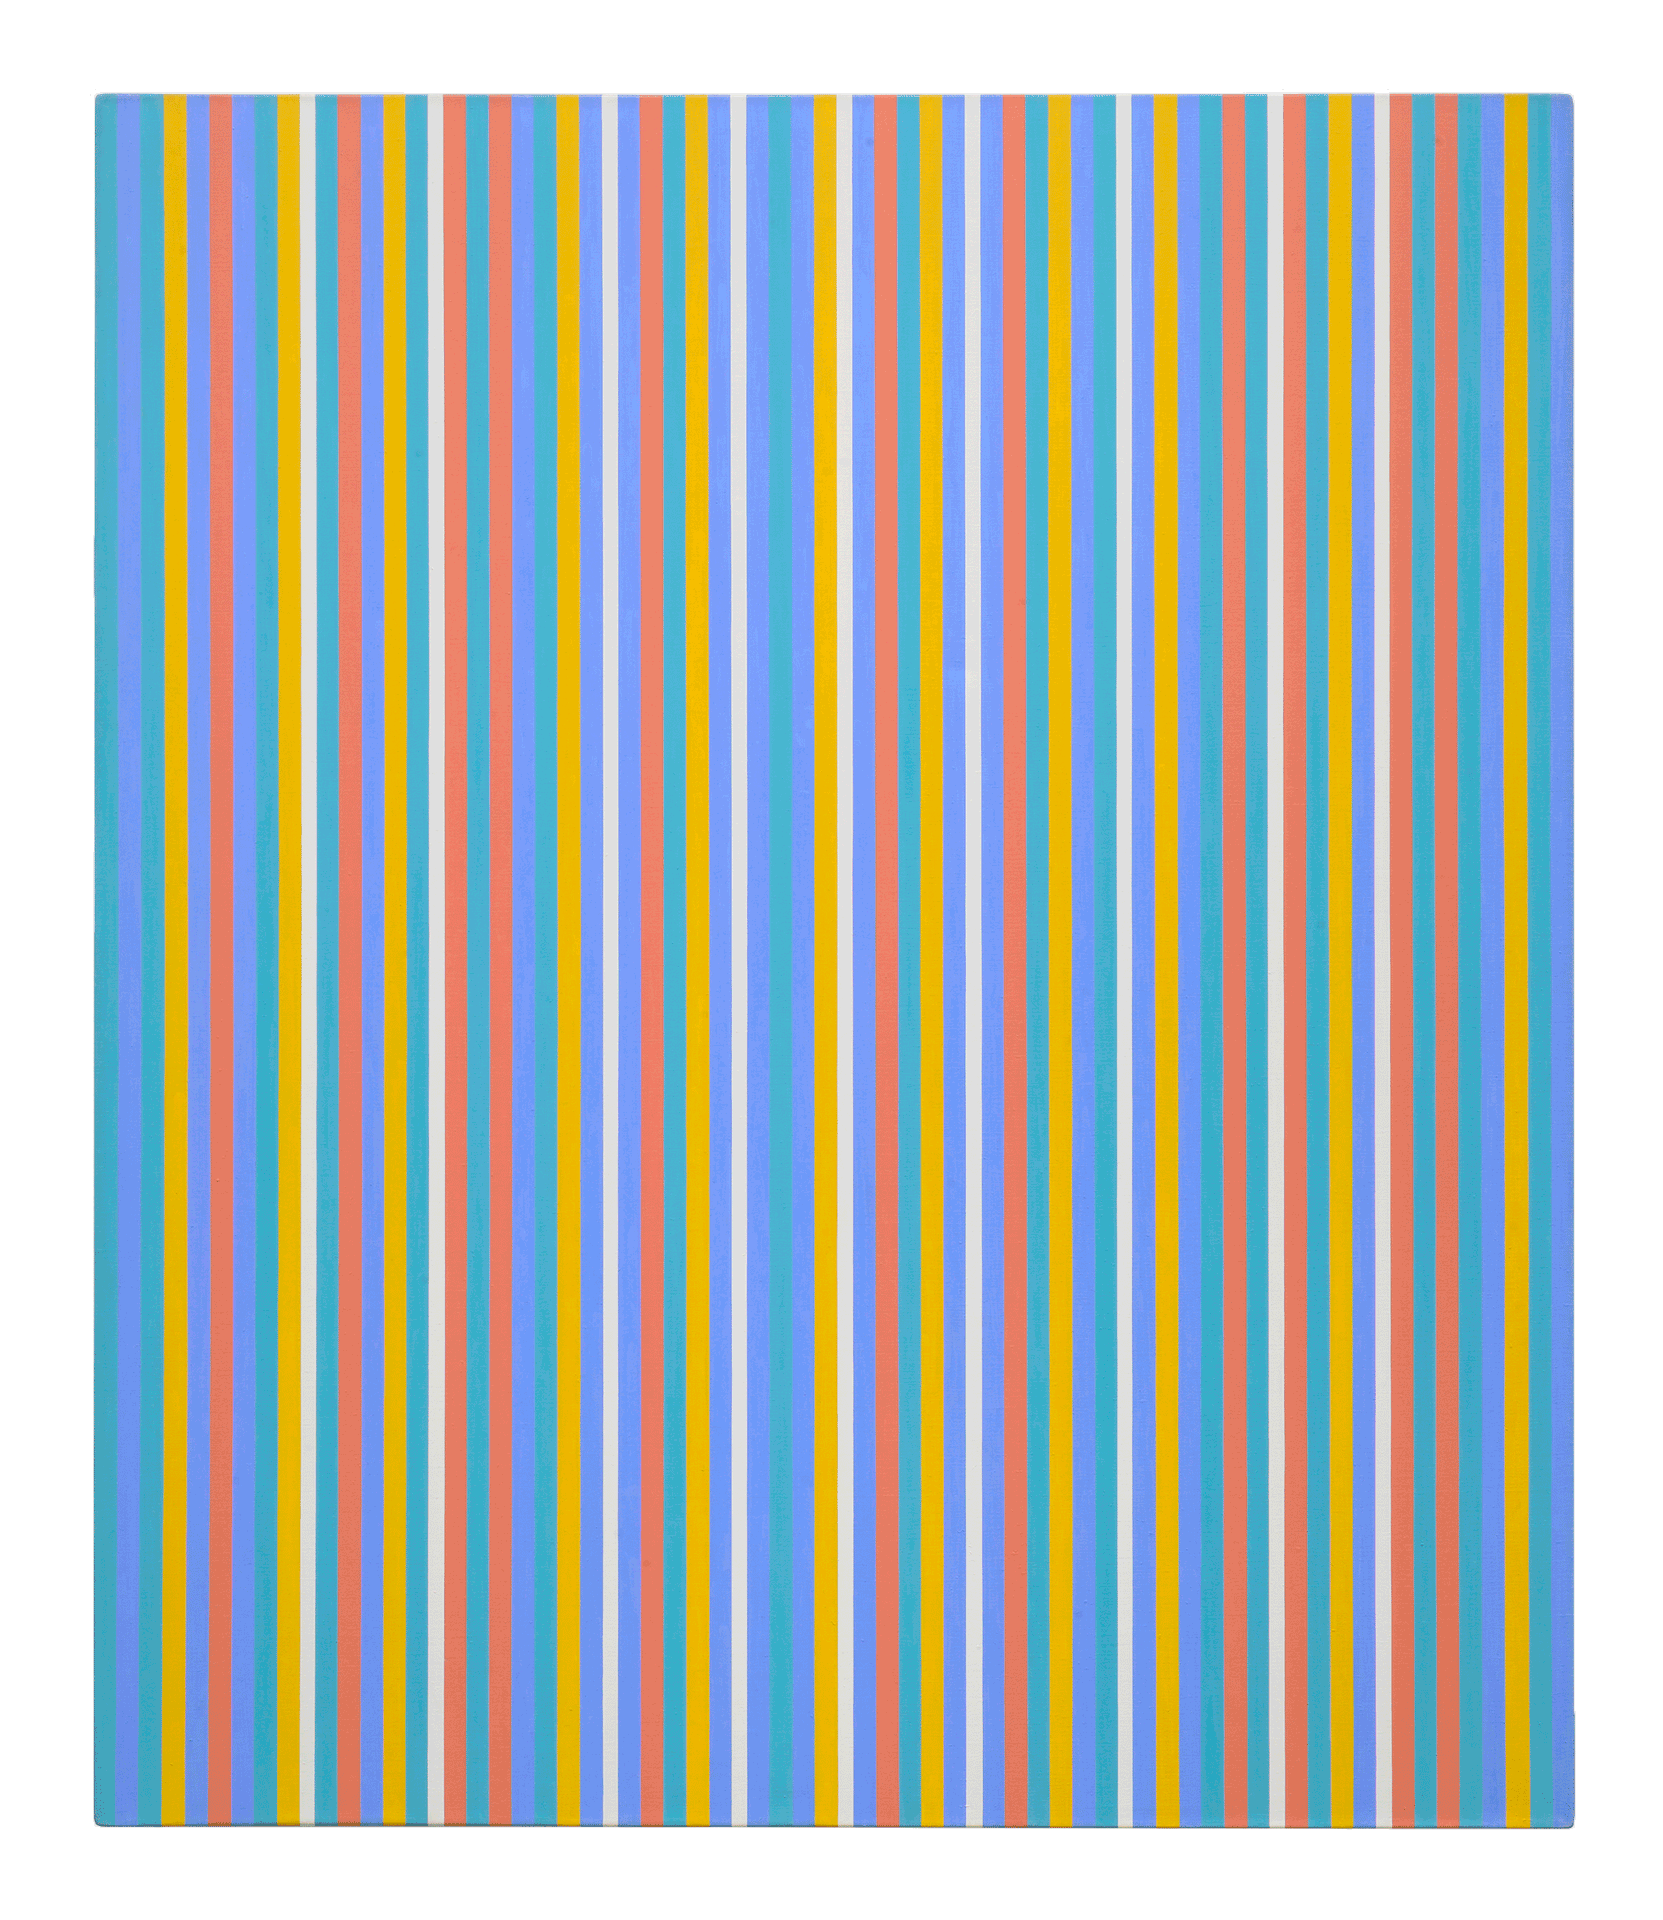 A painting by Bridget Riley, titled Fête, dated 1982